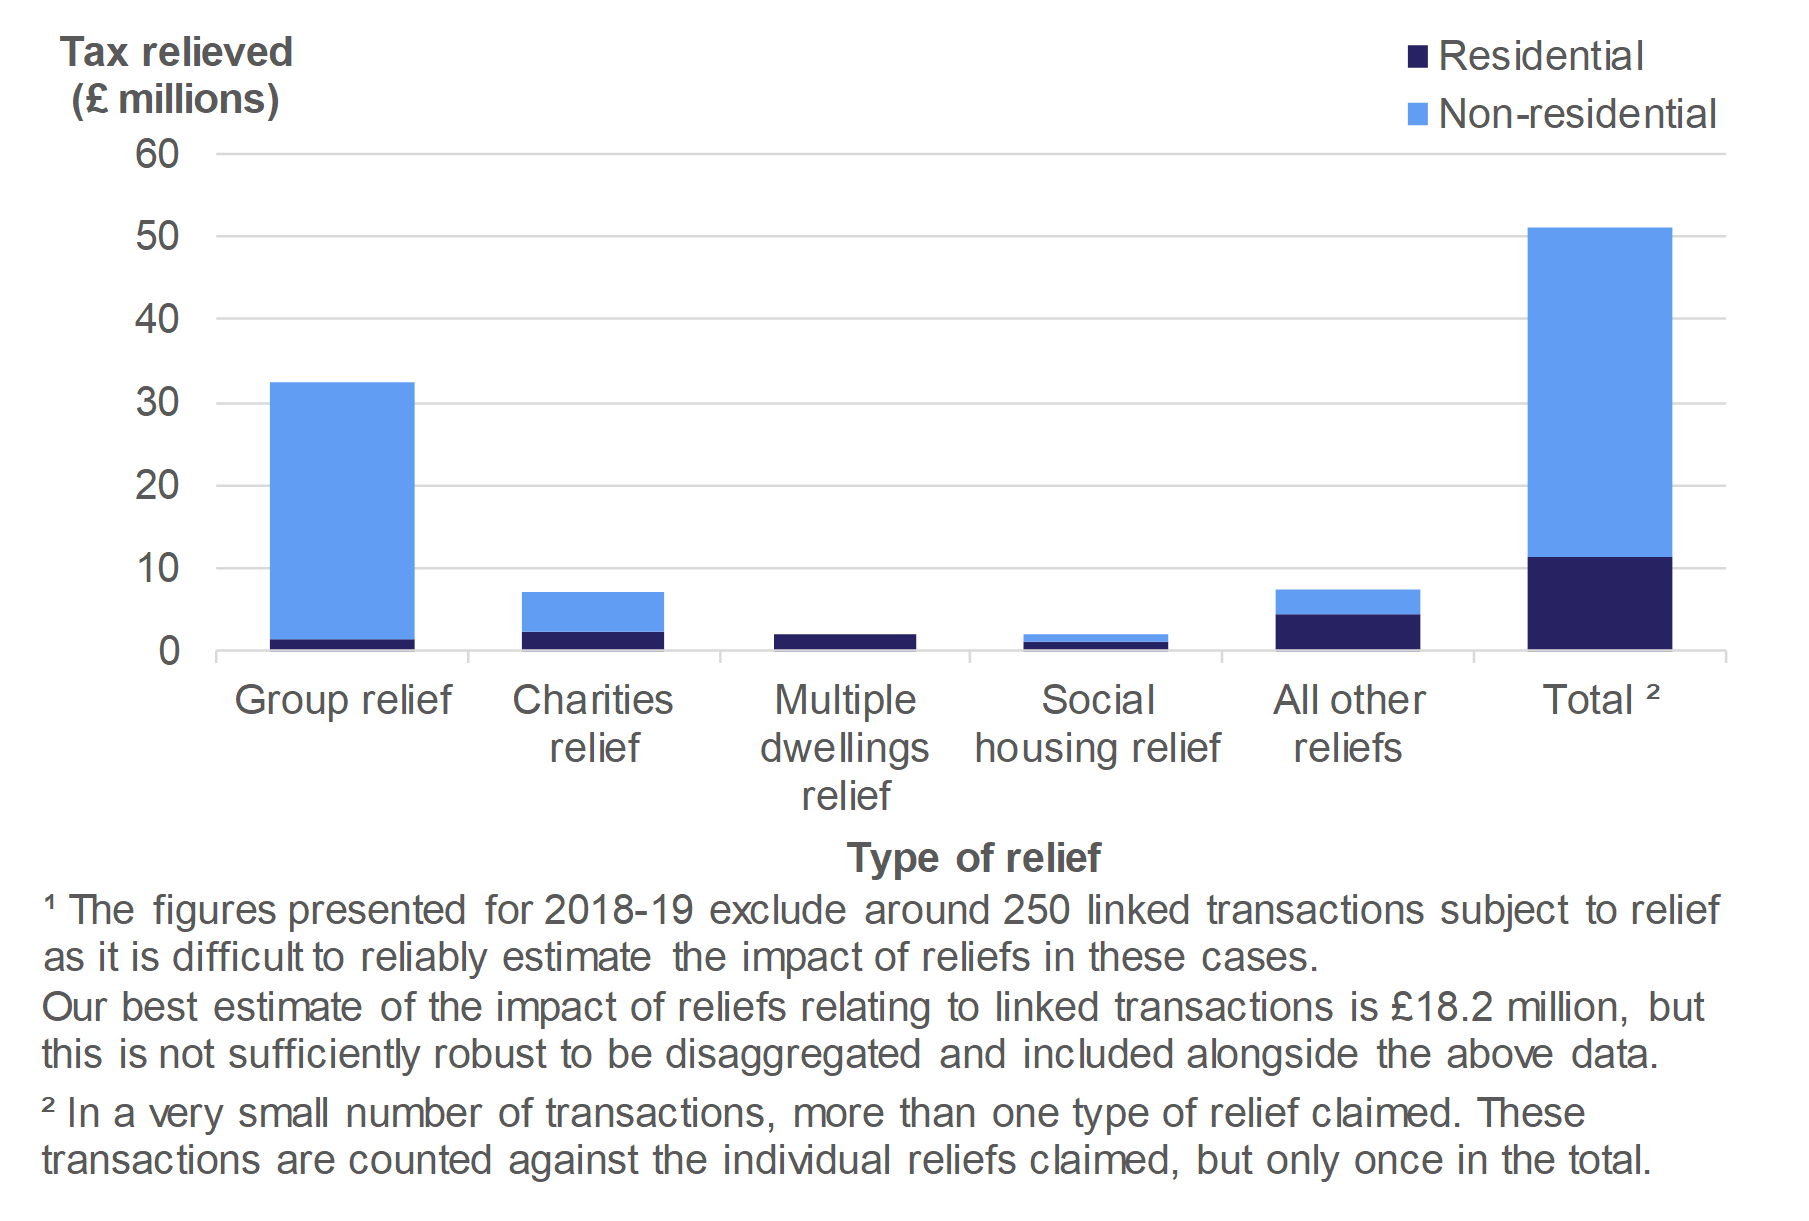 Figure 5.2 shows the amount of tax relieved on residential and non-residential transactions effective in April 2018 to March 2019, by type of relief. 